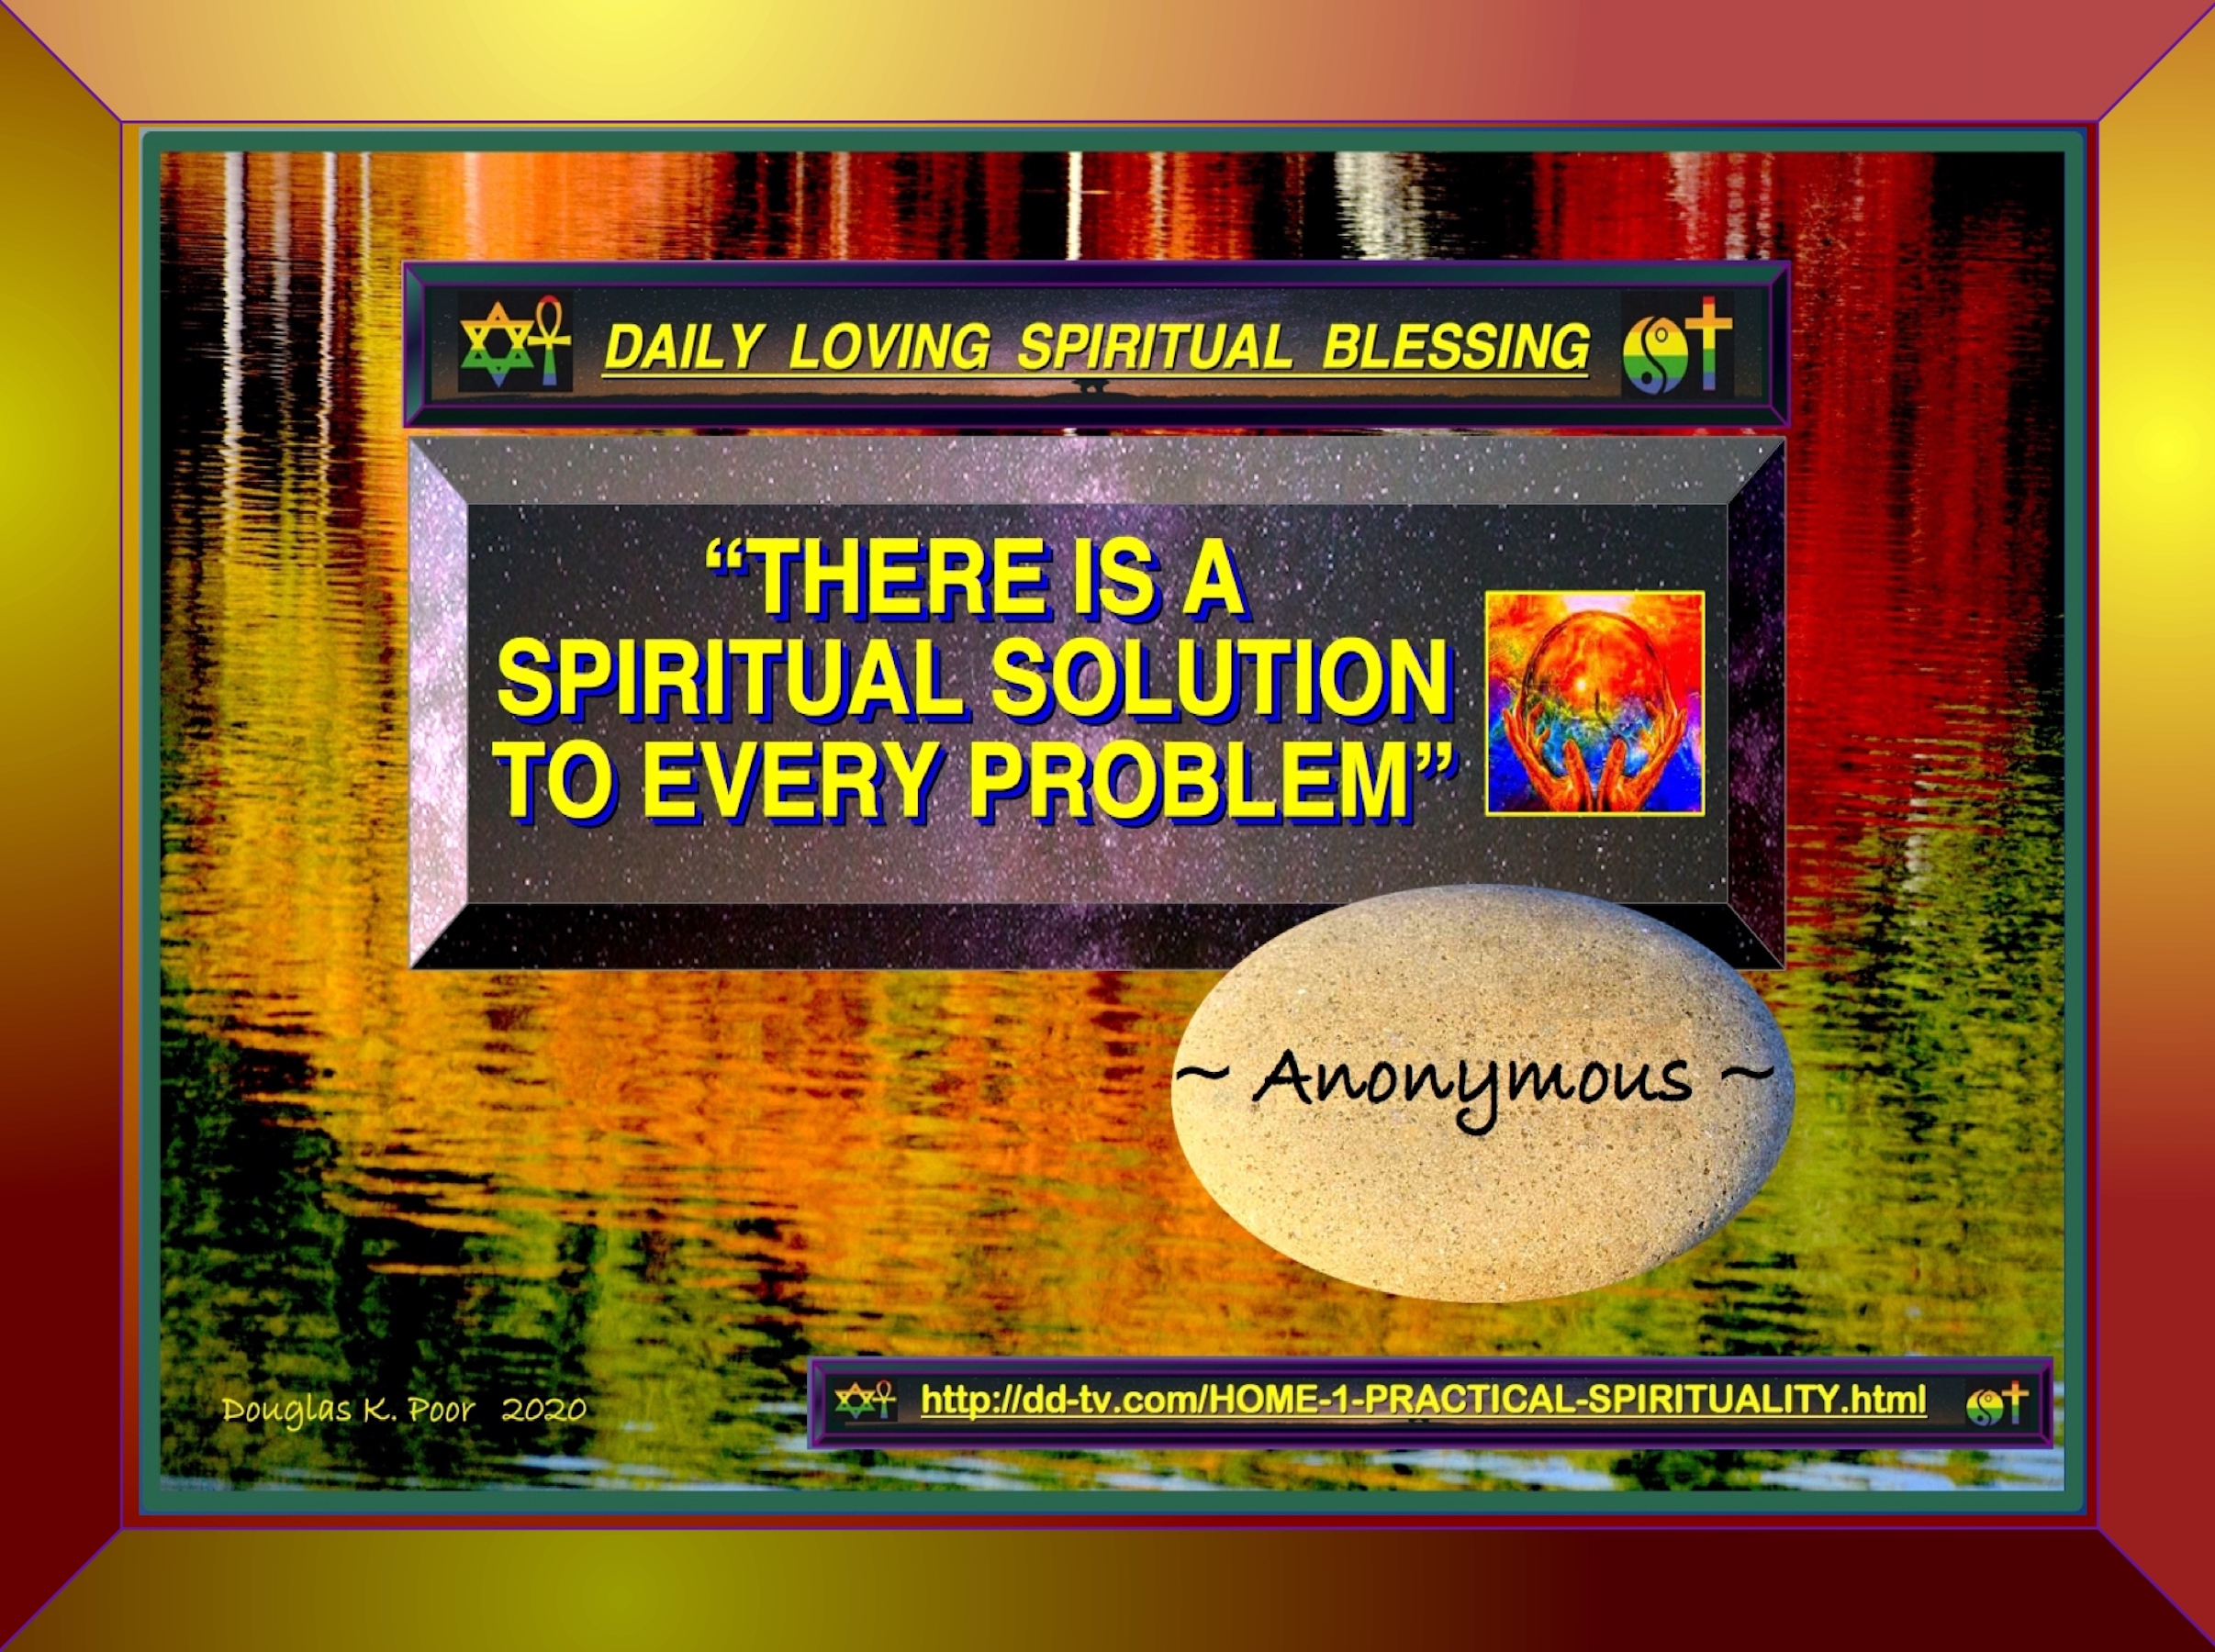 ====================PANEL BLESS THERE IS A SPIRITUAL SOLUTION TO EVERY PROBLEM===============================================================================================PANEL BLESS THERE IS A SPIRITUAL SOLUTION TO EVERY PROBLEM